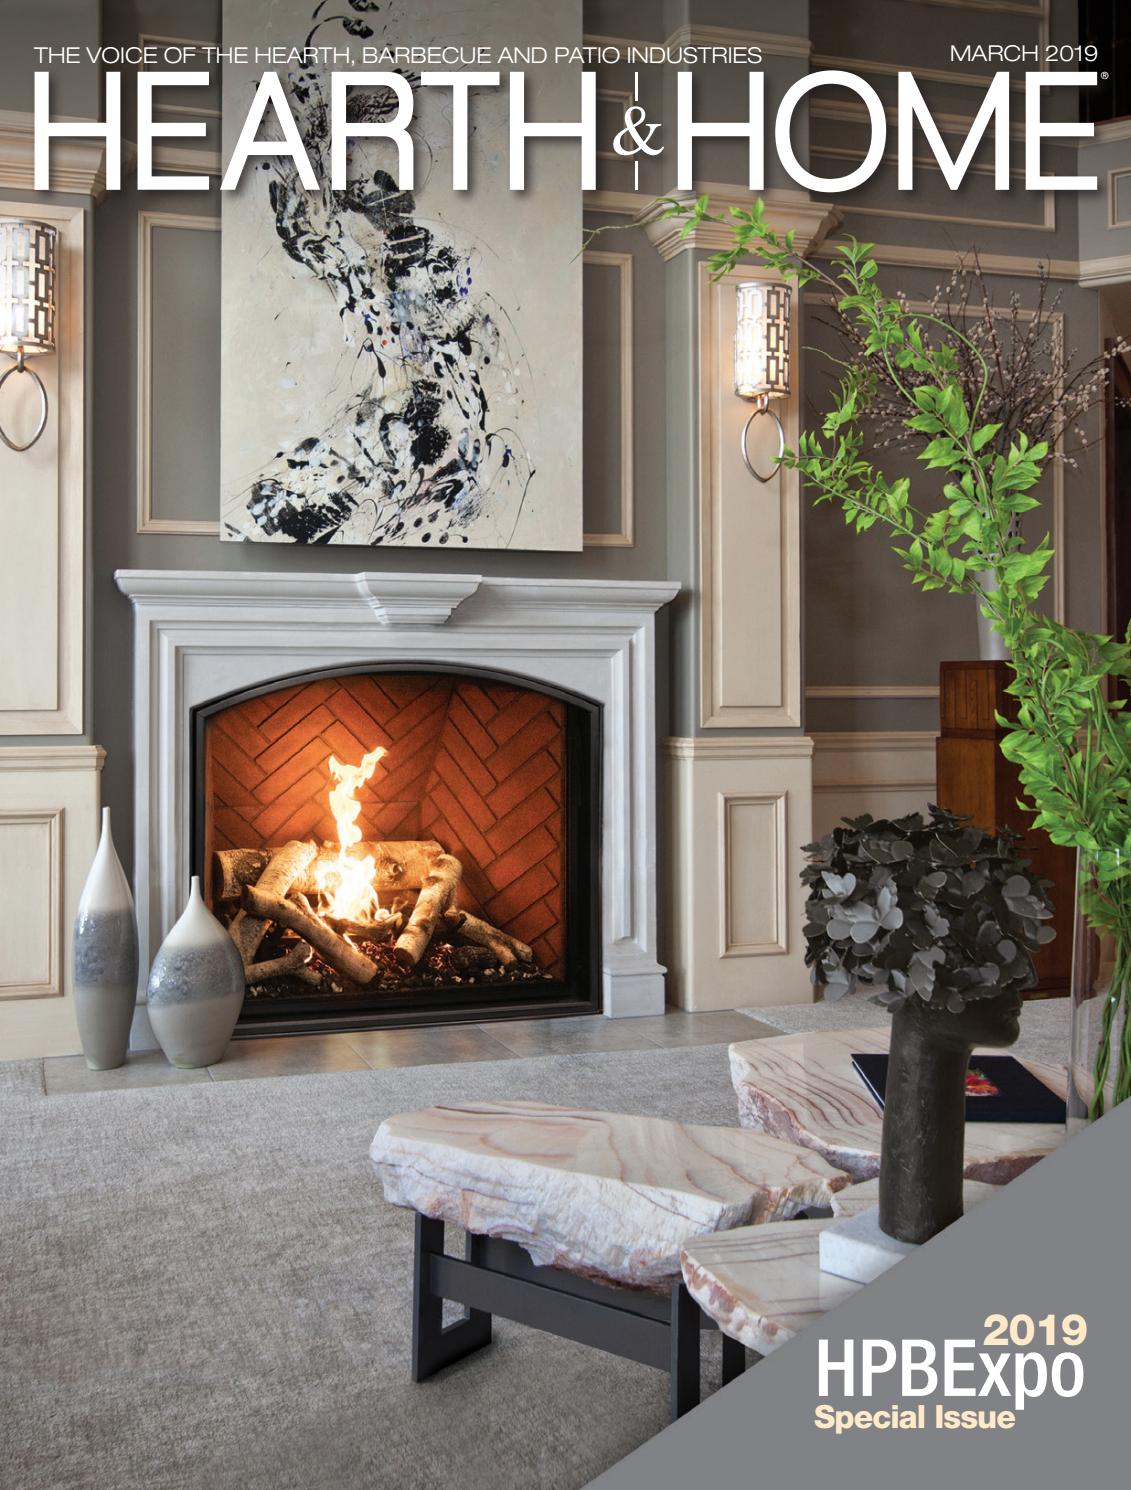 Standard Fireplace Mantel Height Fresh Hearth & Home Magazine – 2019 March issue by Hearth & Home